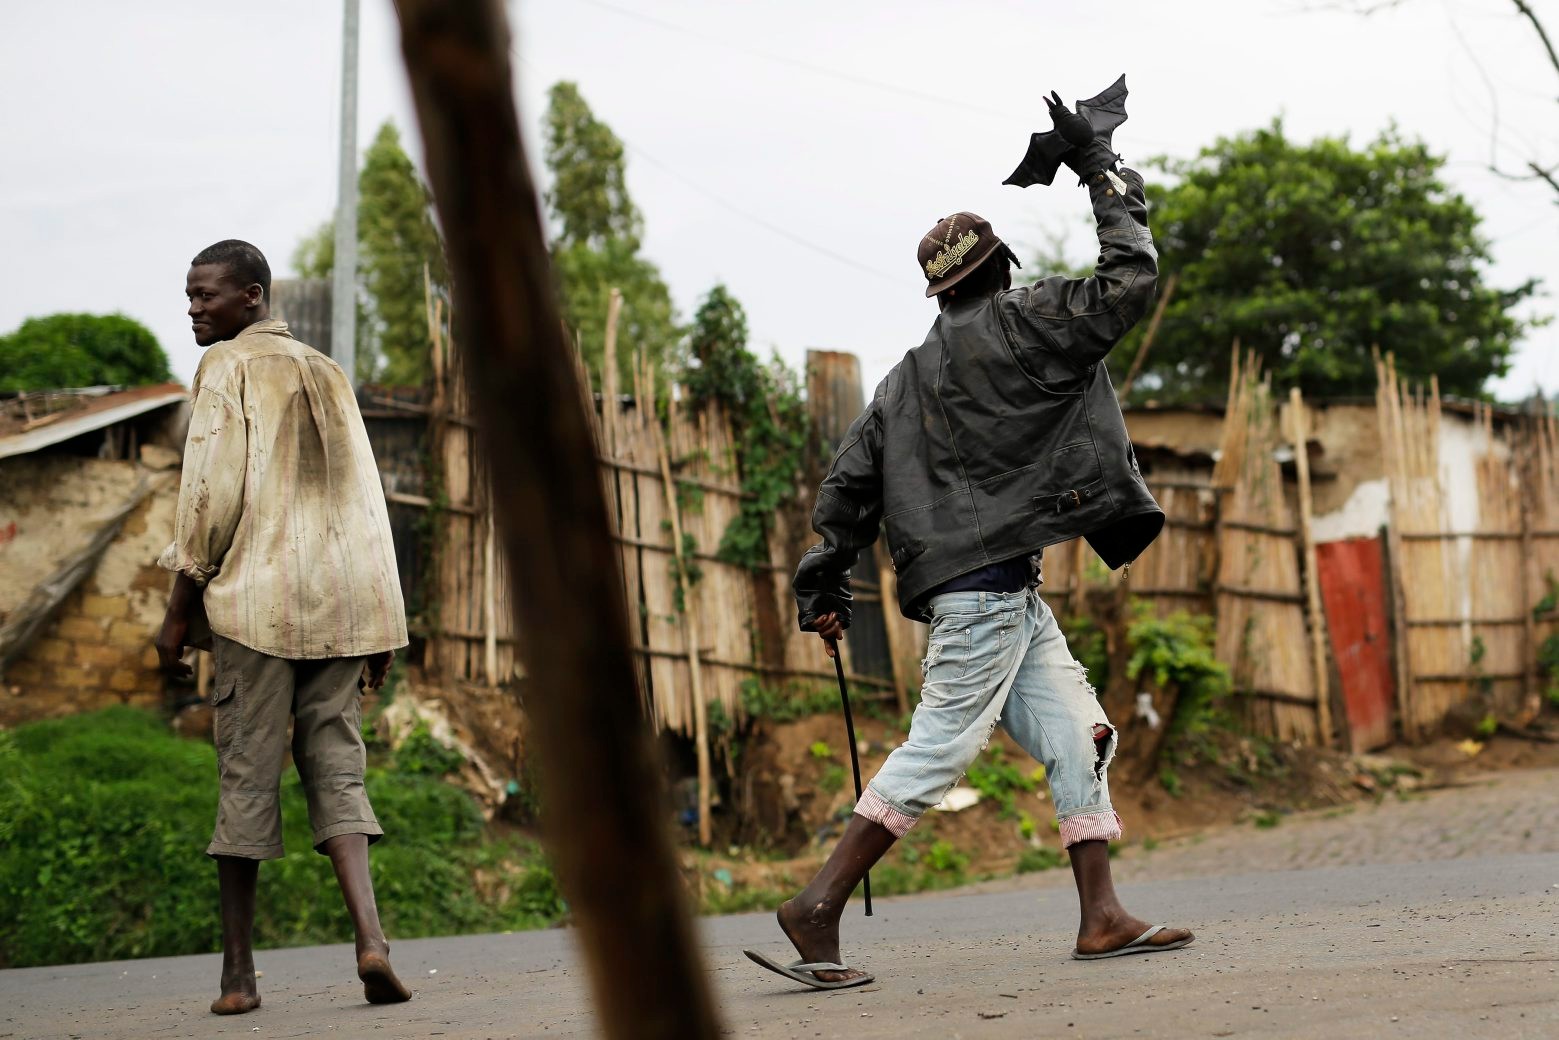 A demonstrator wears a glove in the shape of a bat as he marches up and down the main strip of the Musaga neighborhood of Bujumbura, Burundi, Monday, May 18, 2015. The army has been deployed throughout the town as hundreds return to the streets Monday to protest the president's decision to seek a third term.  ( AP Photo/Jerome Delay)   Burundi Political Tensions